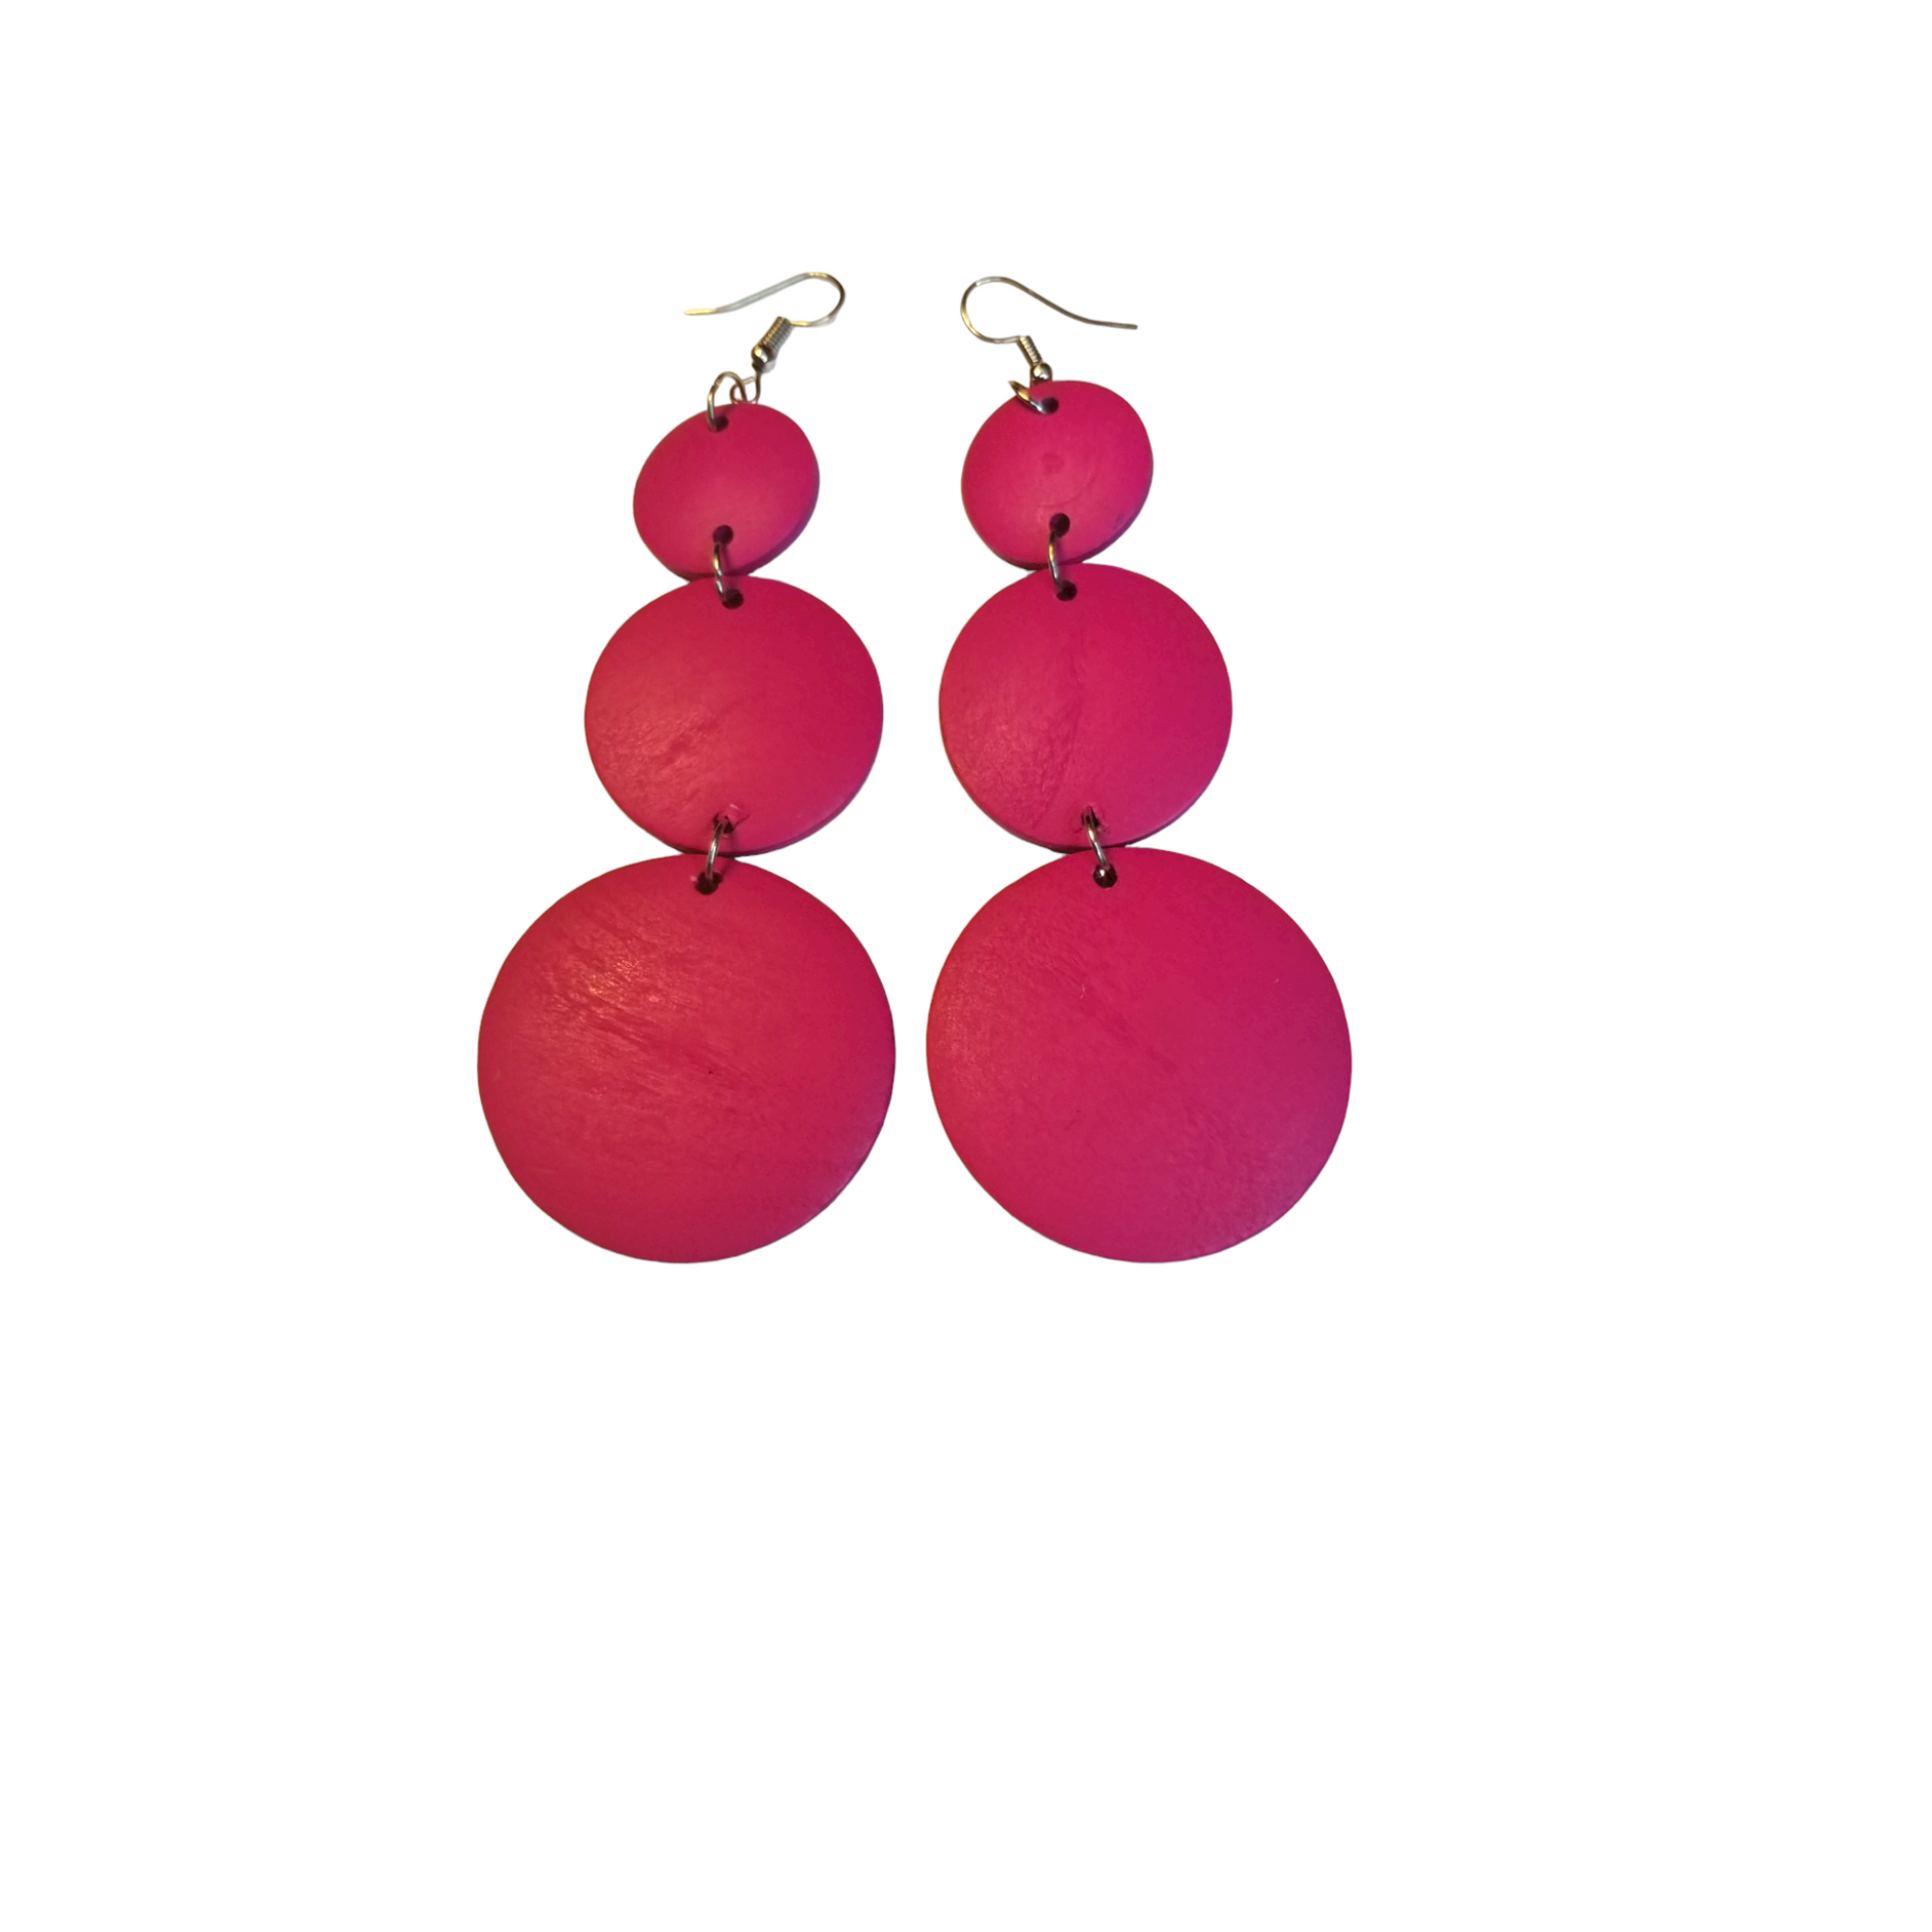 Hot Pink Wooden Circles Earrings